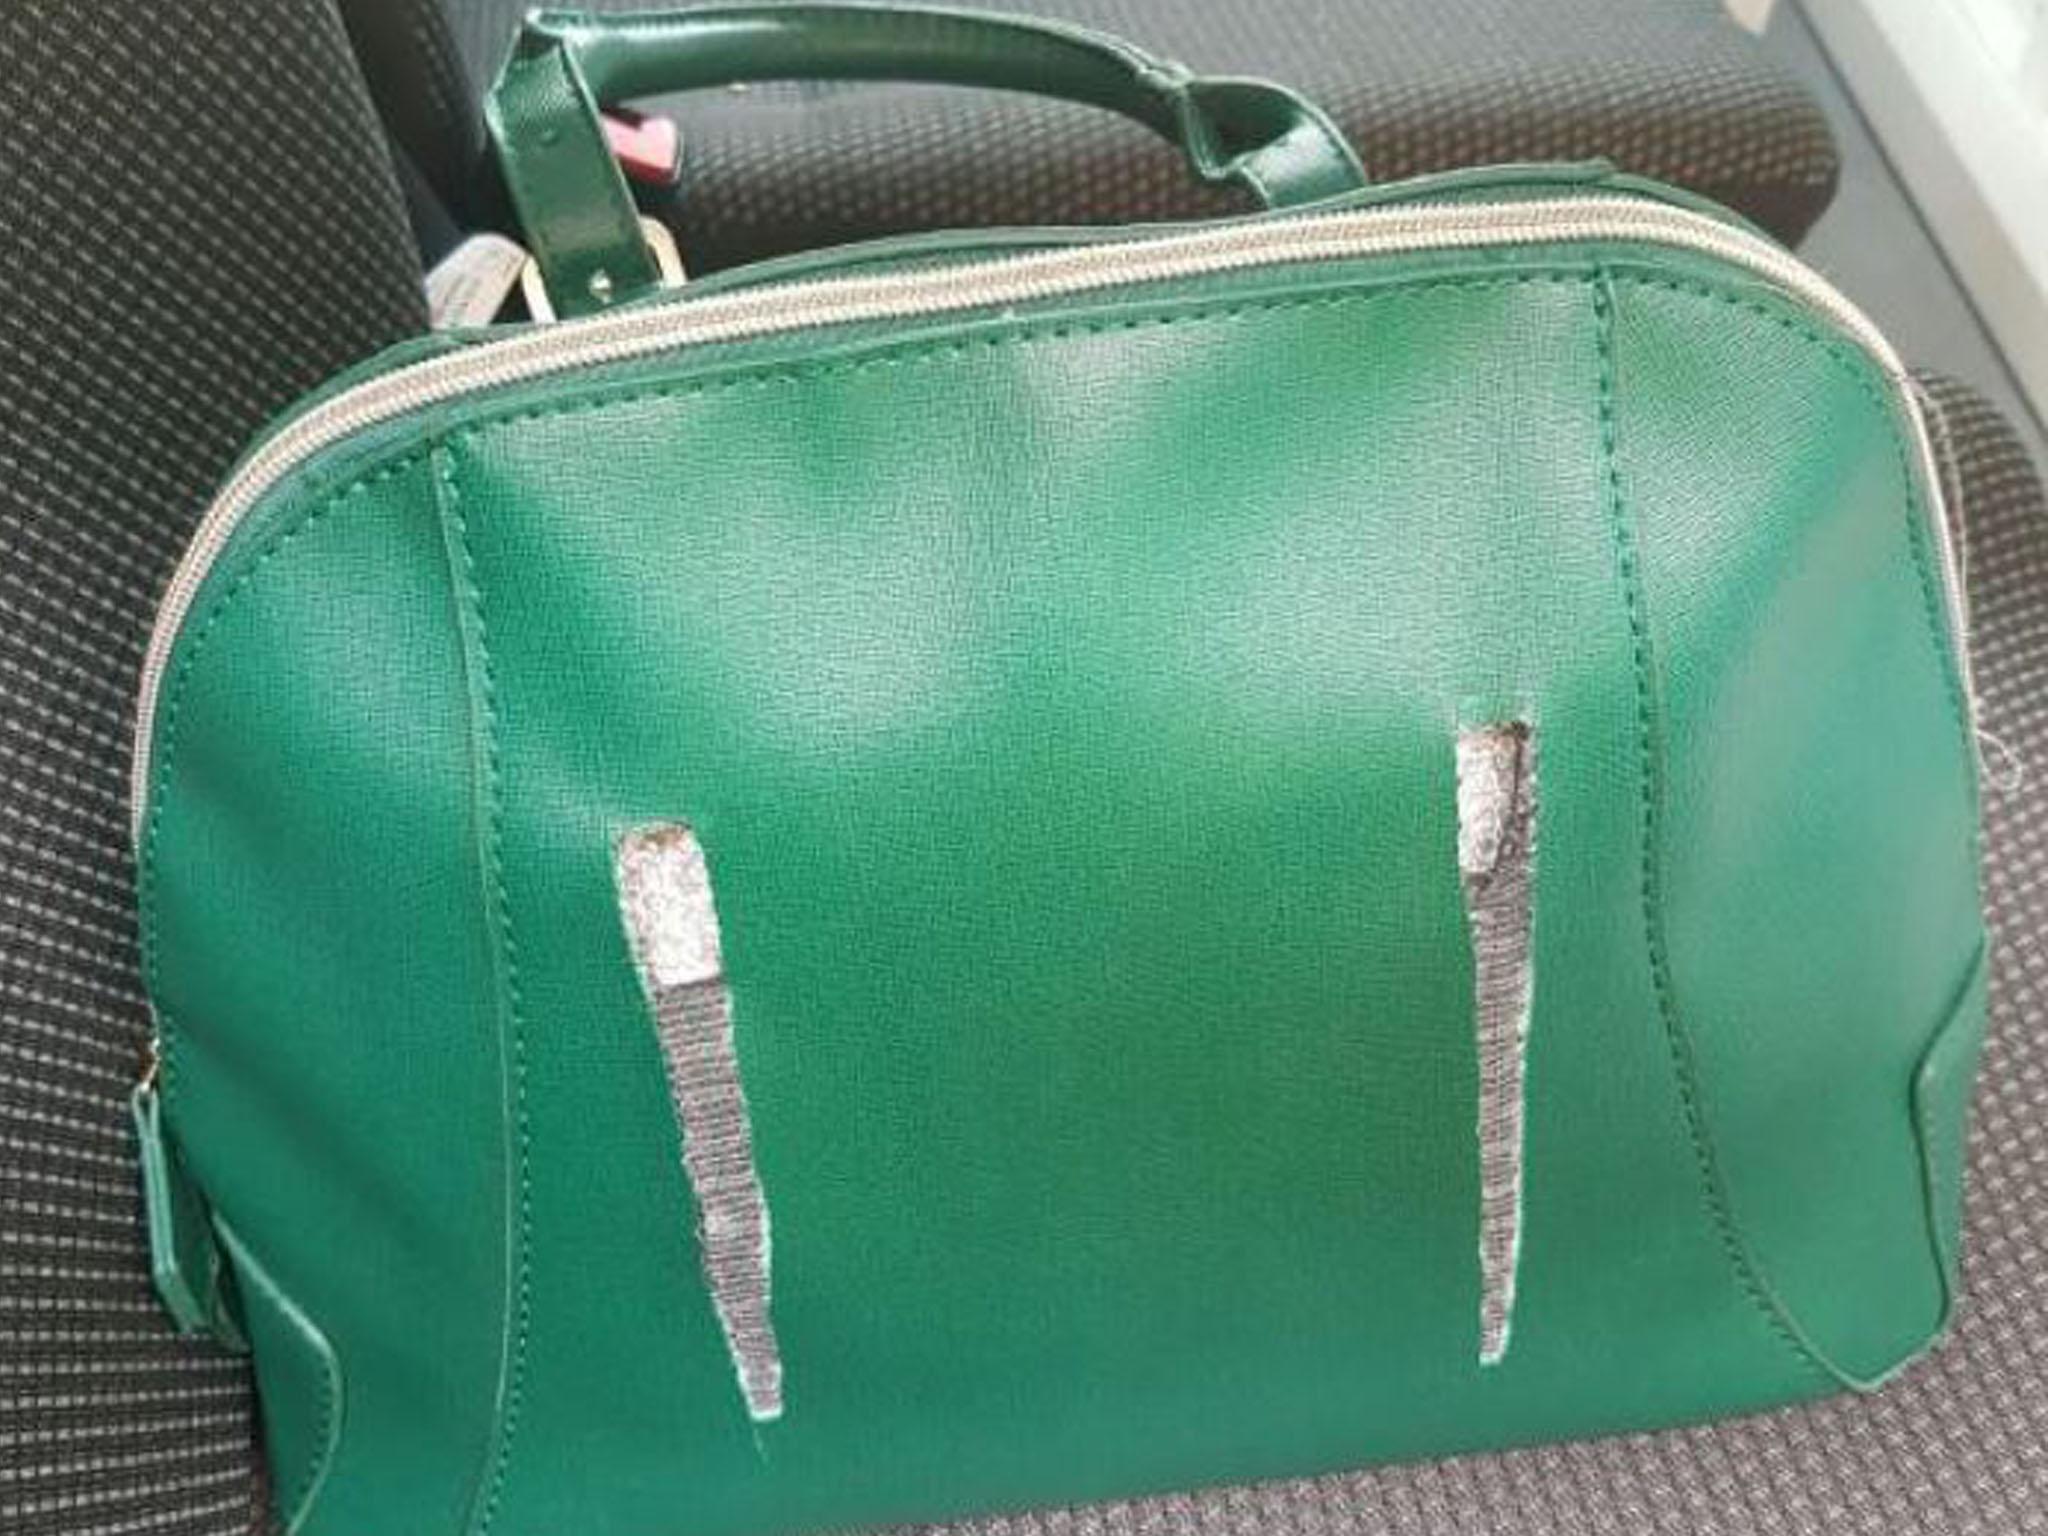 The muggers discarded the stolen green handbag after the attack